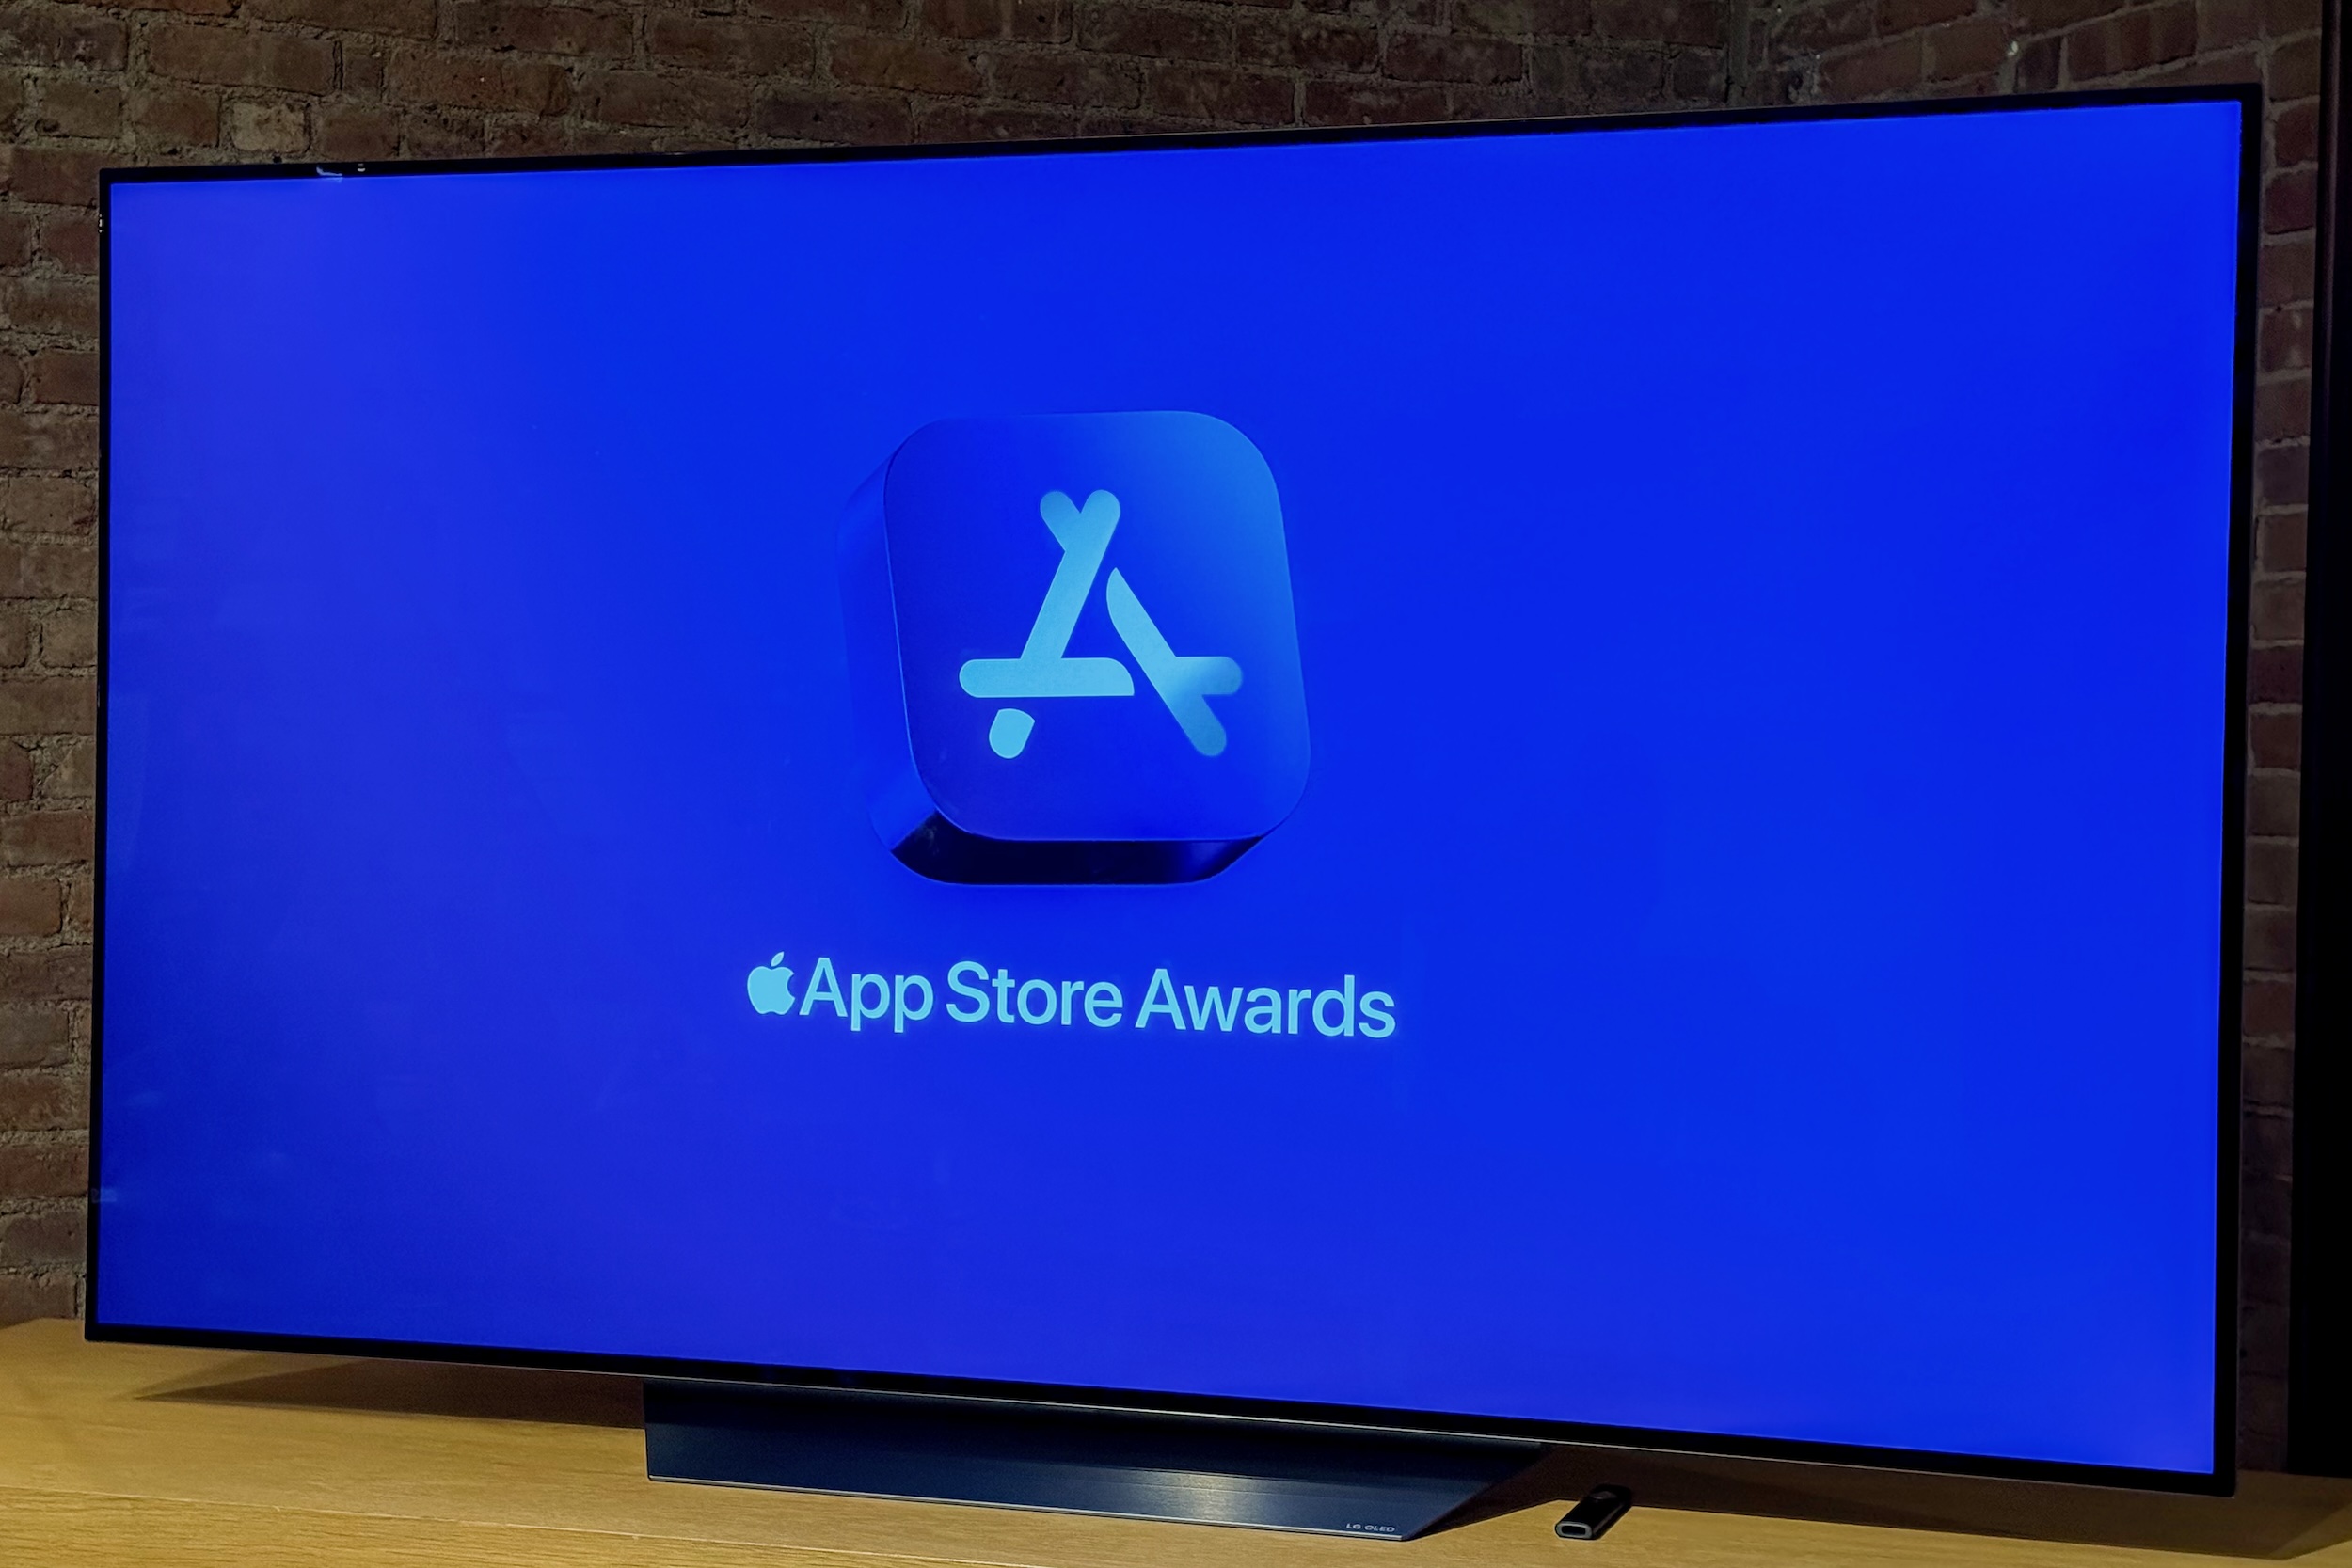 Apple Apps of the Year Awards 2019 – Here are the top iOS Apps and Games